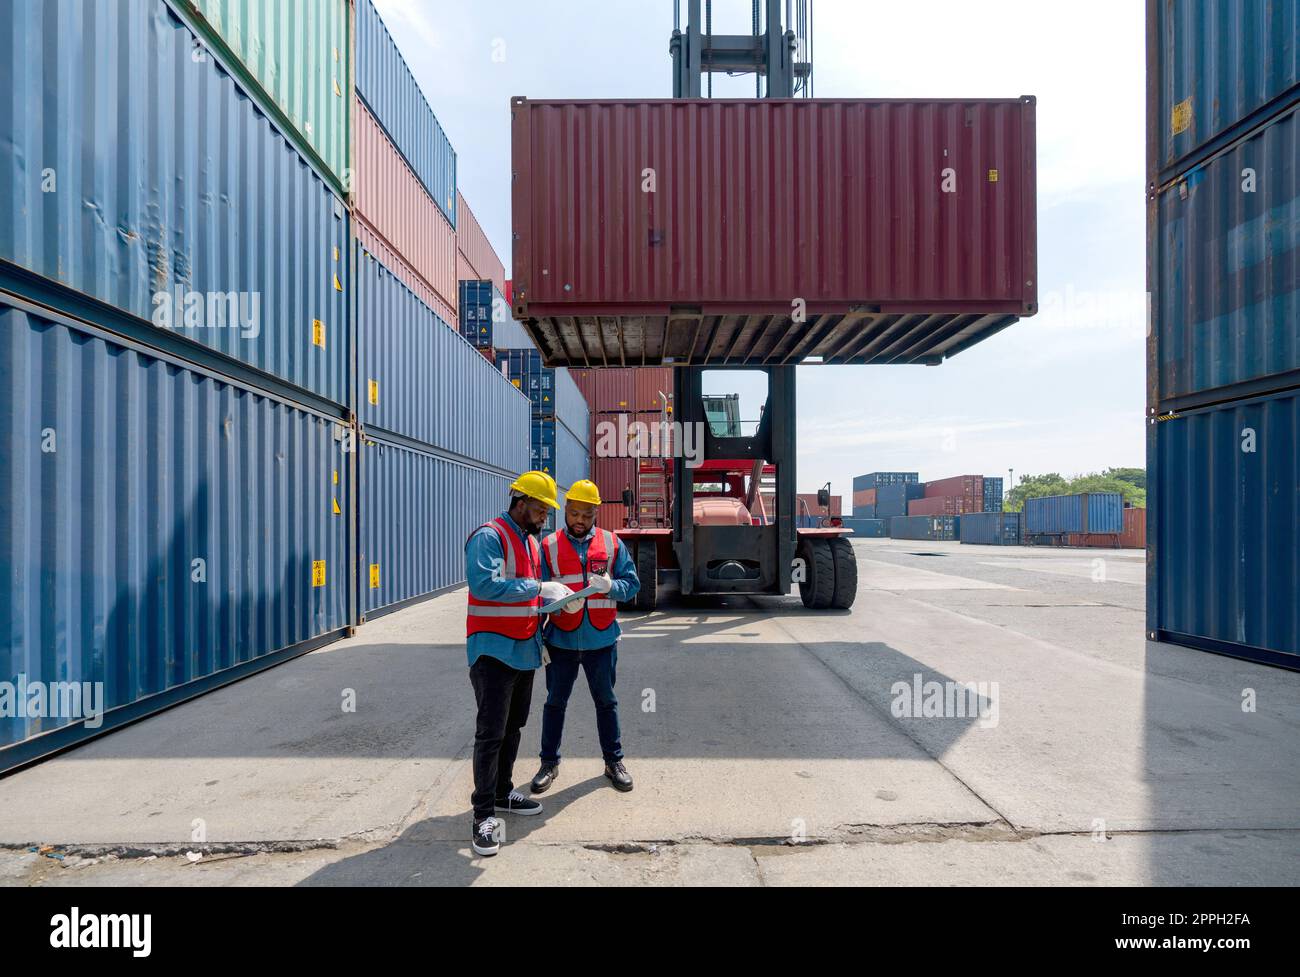 Two short black hair man with moustache and beard dressed in hardhat, safety vest and protective glove working during the day under sunlight. There are heavy duty container forklift in the work area. Stock Photo